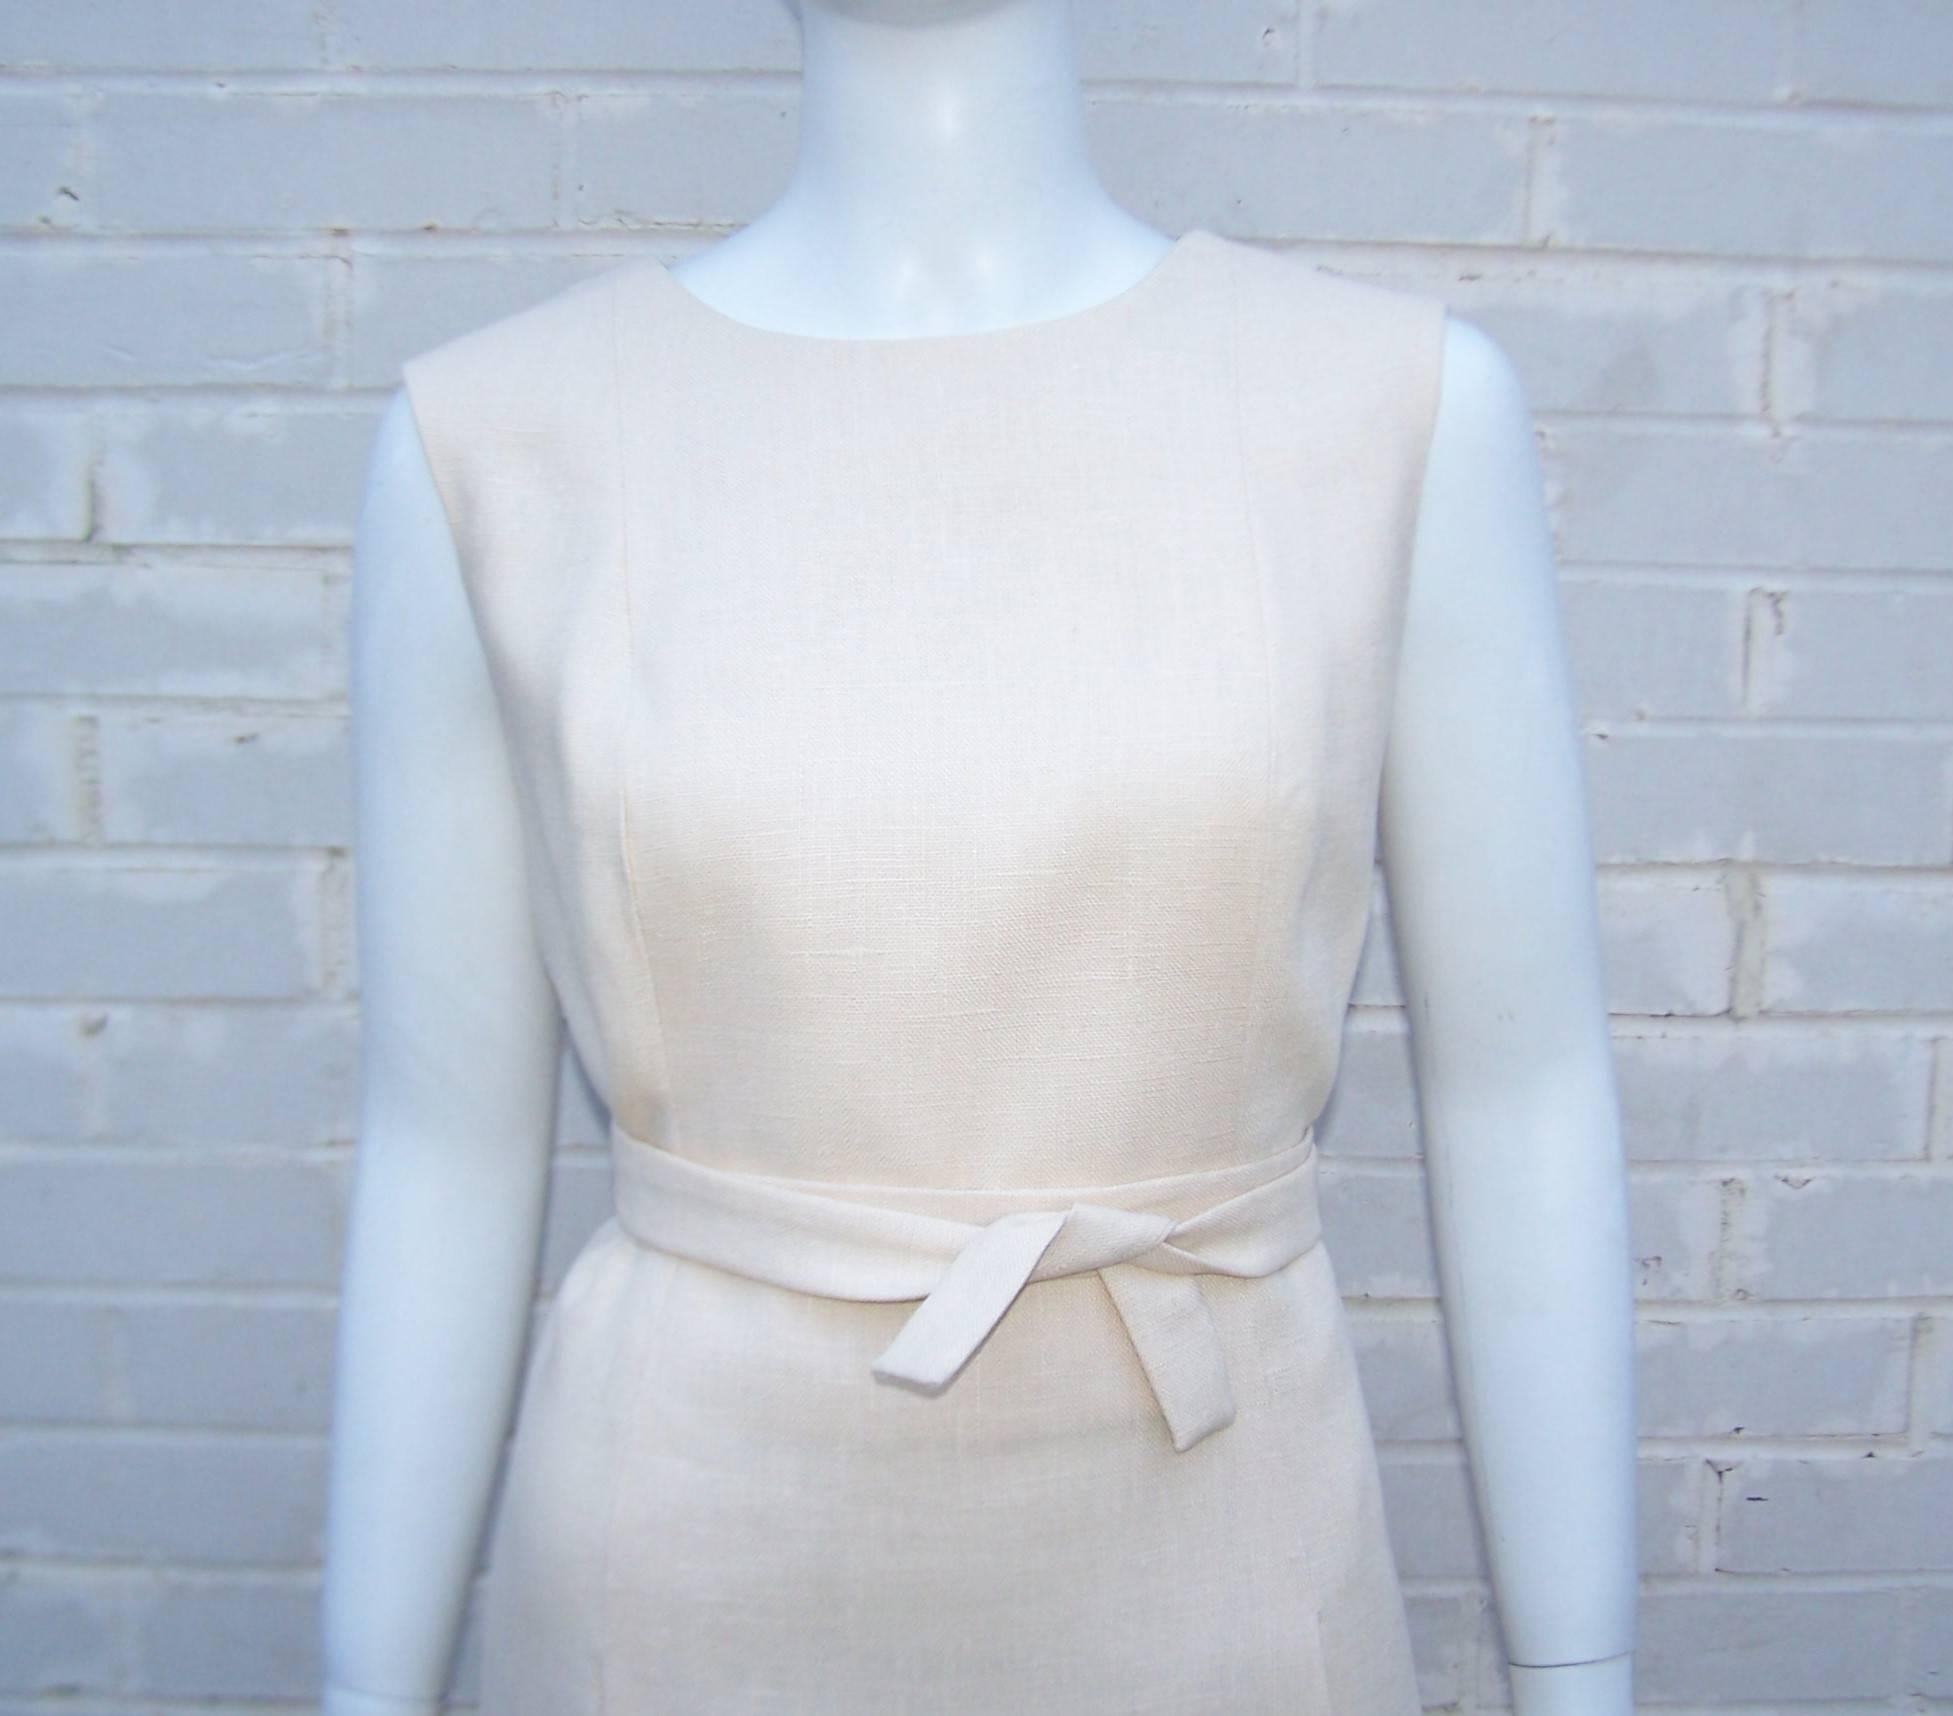 This 1960's vanilla linen dress by Young Elegante has an 'elegant' design worthy of its label.  The simple sleeveless shift dress zips and hooks at the back with hidden front pockets and a nice subtle 'v' detail at the back.  The surprise pull-on